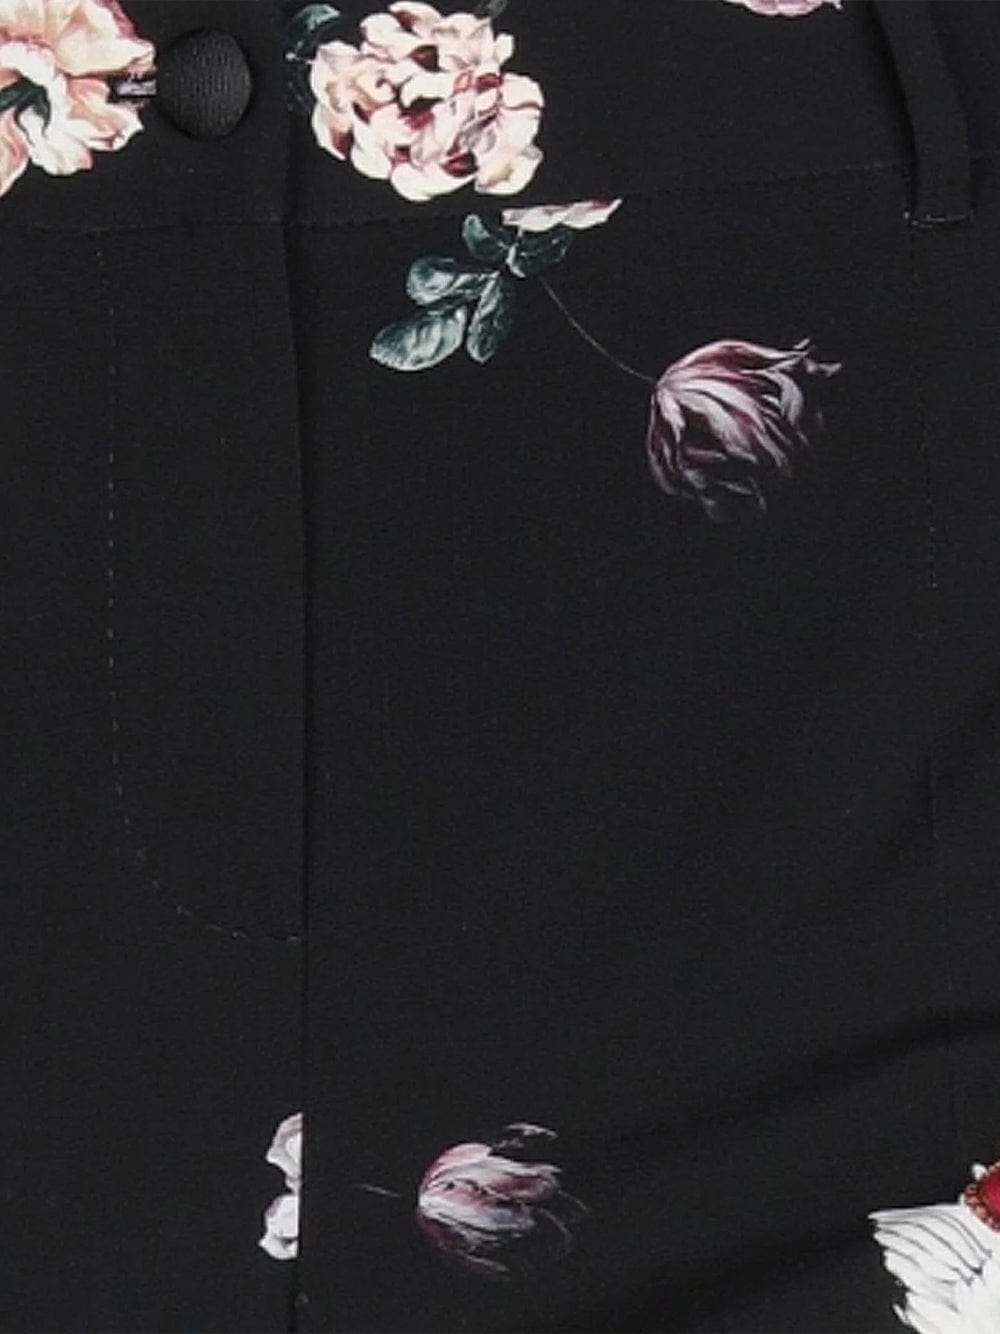 Dolce & Gabbana Angel-Print Floral Cropped Trousers